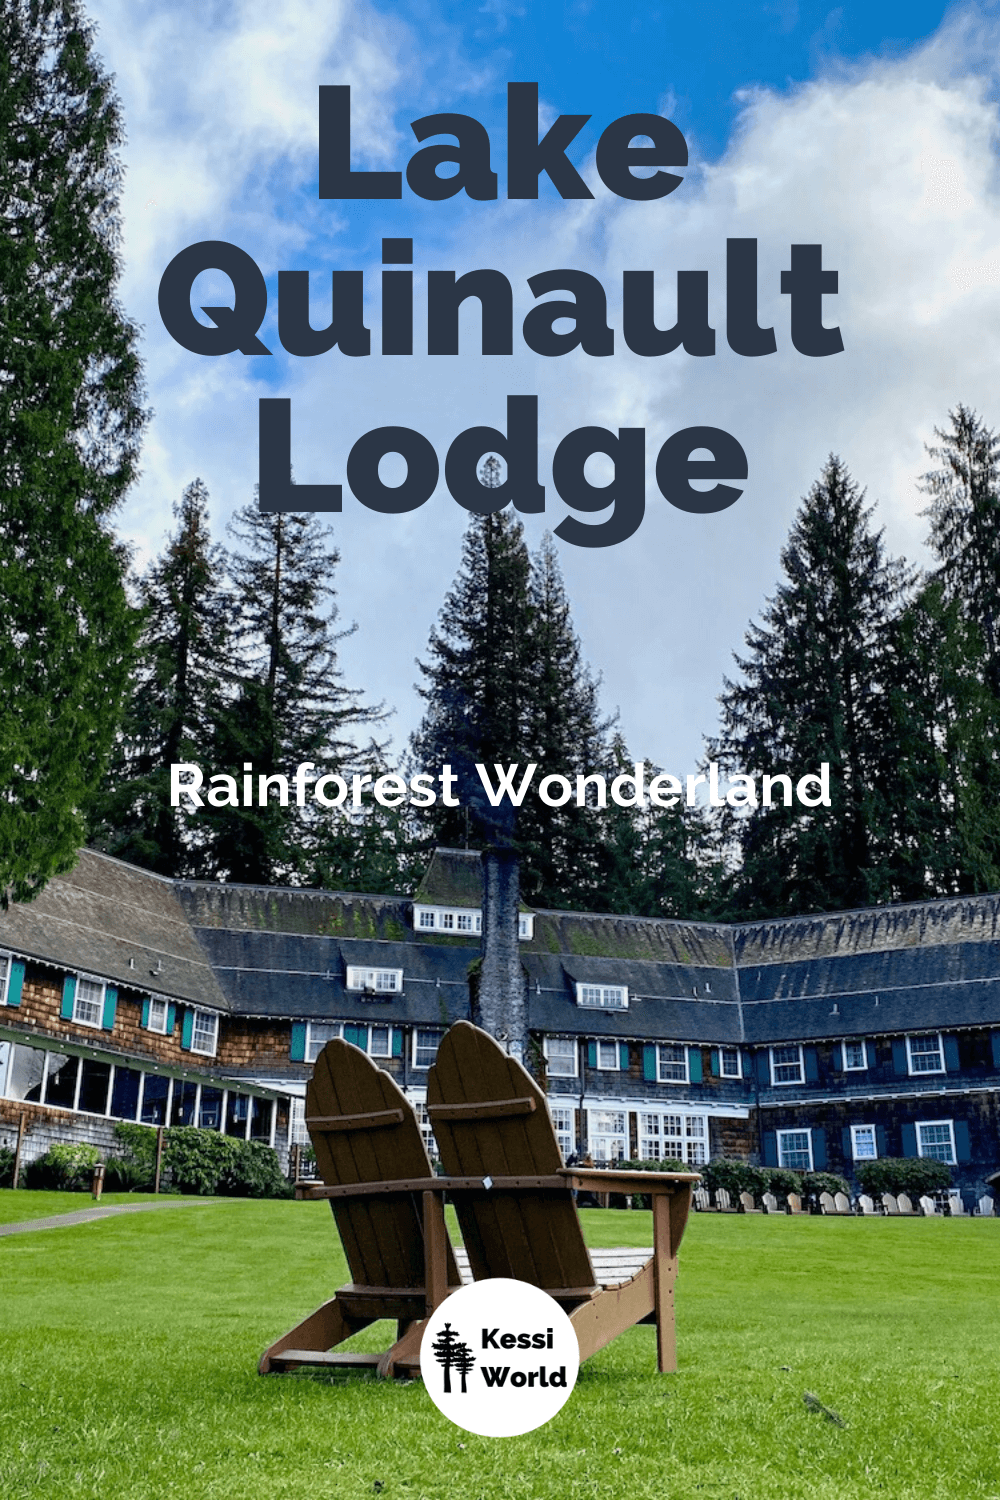 A view of Lake Quinault Lodge looking from the Lake back up to the historic lodge. Two adirondack chairs capture the foreground.